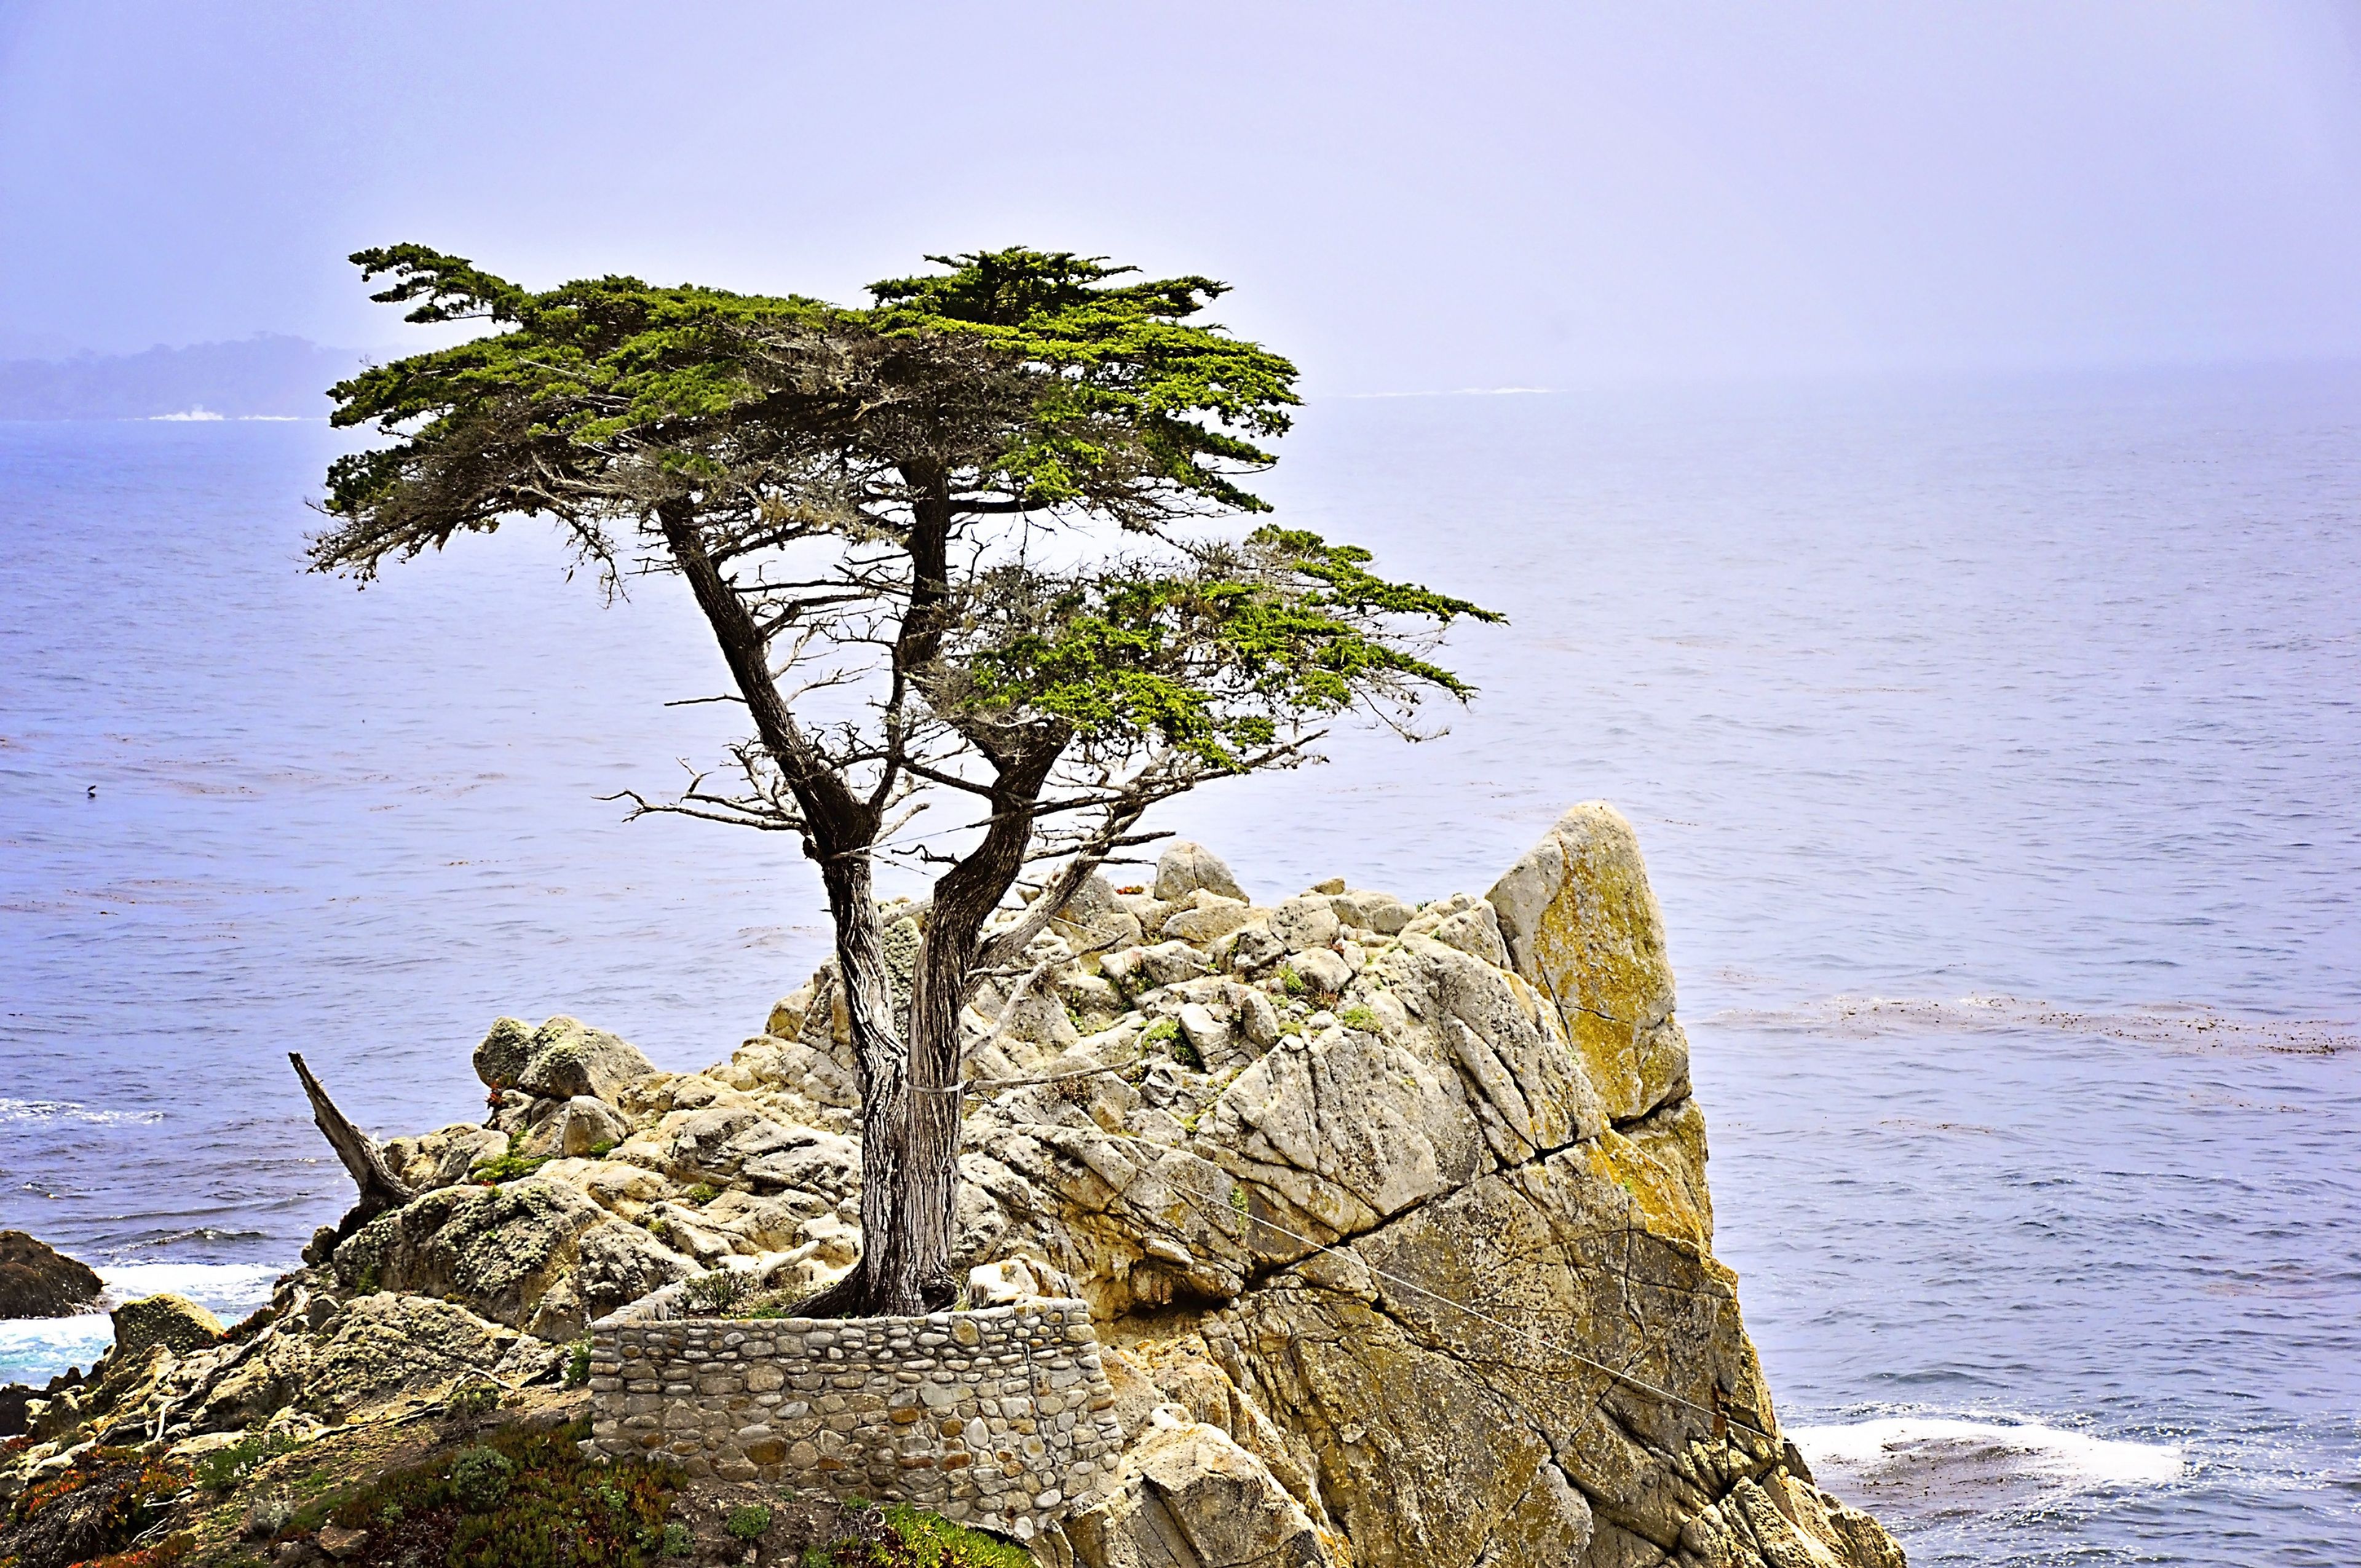 A cypress tree on a cliff.